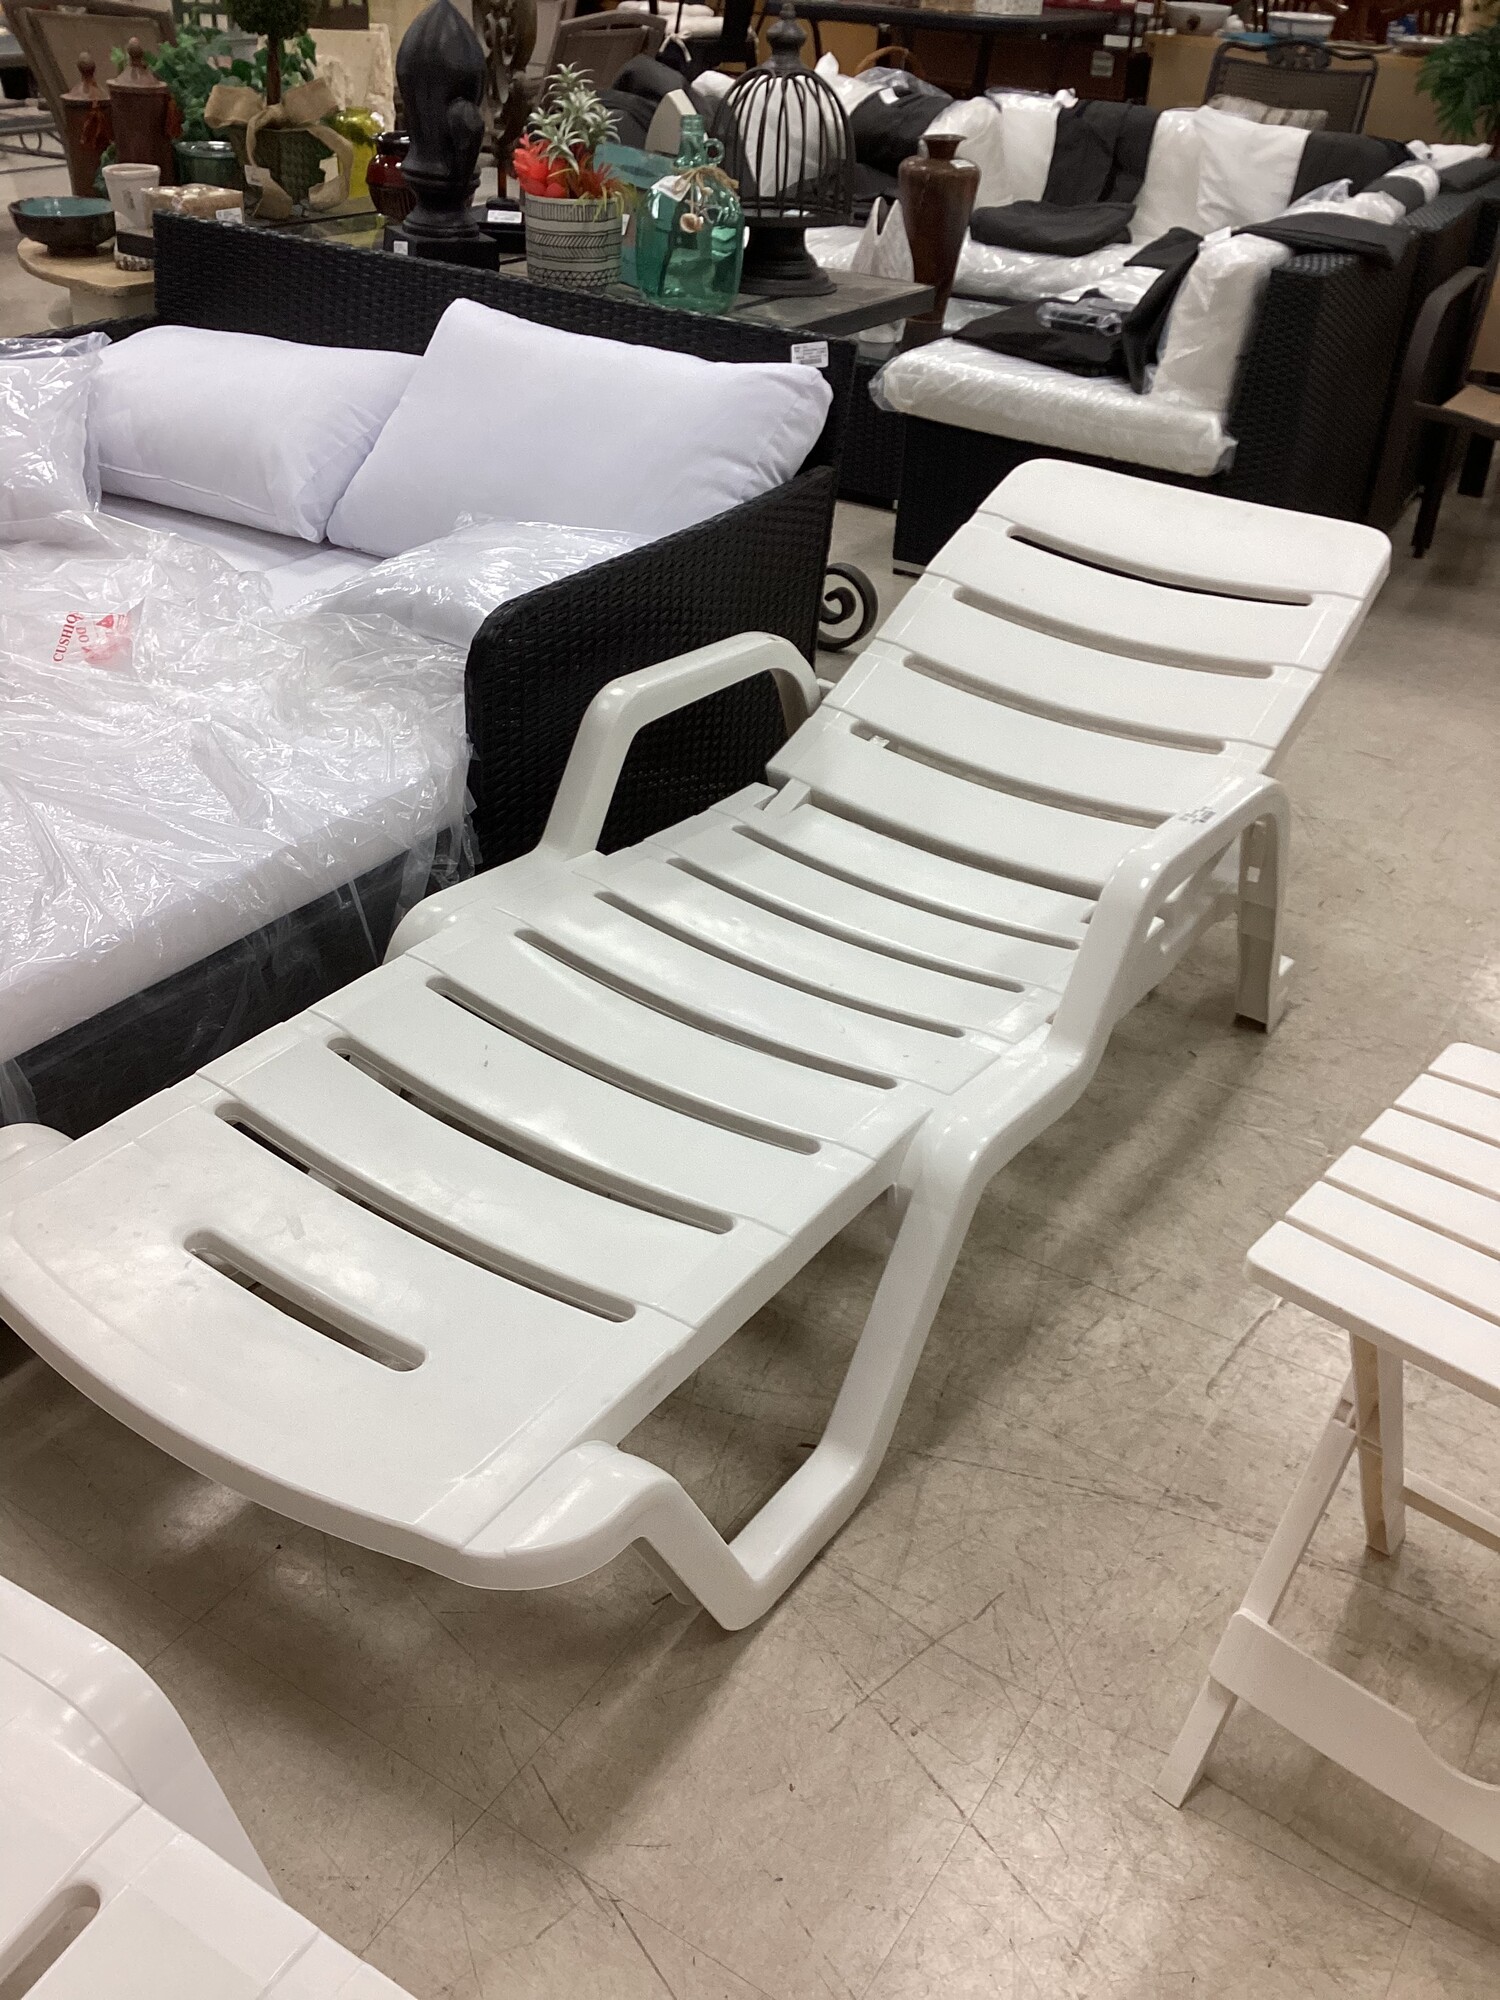 Patio Lounger, White, Adjustable
70 In x 27 In